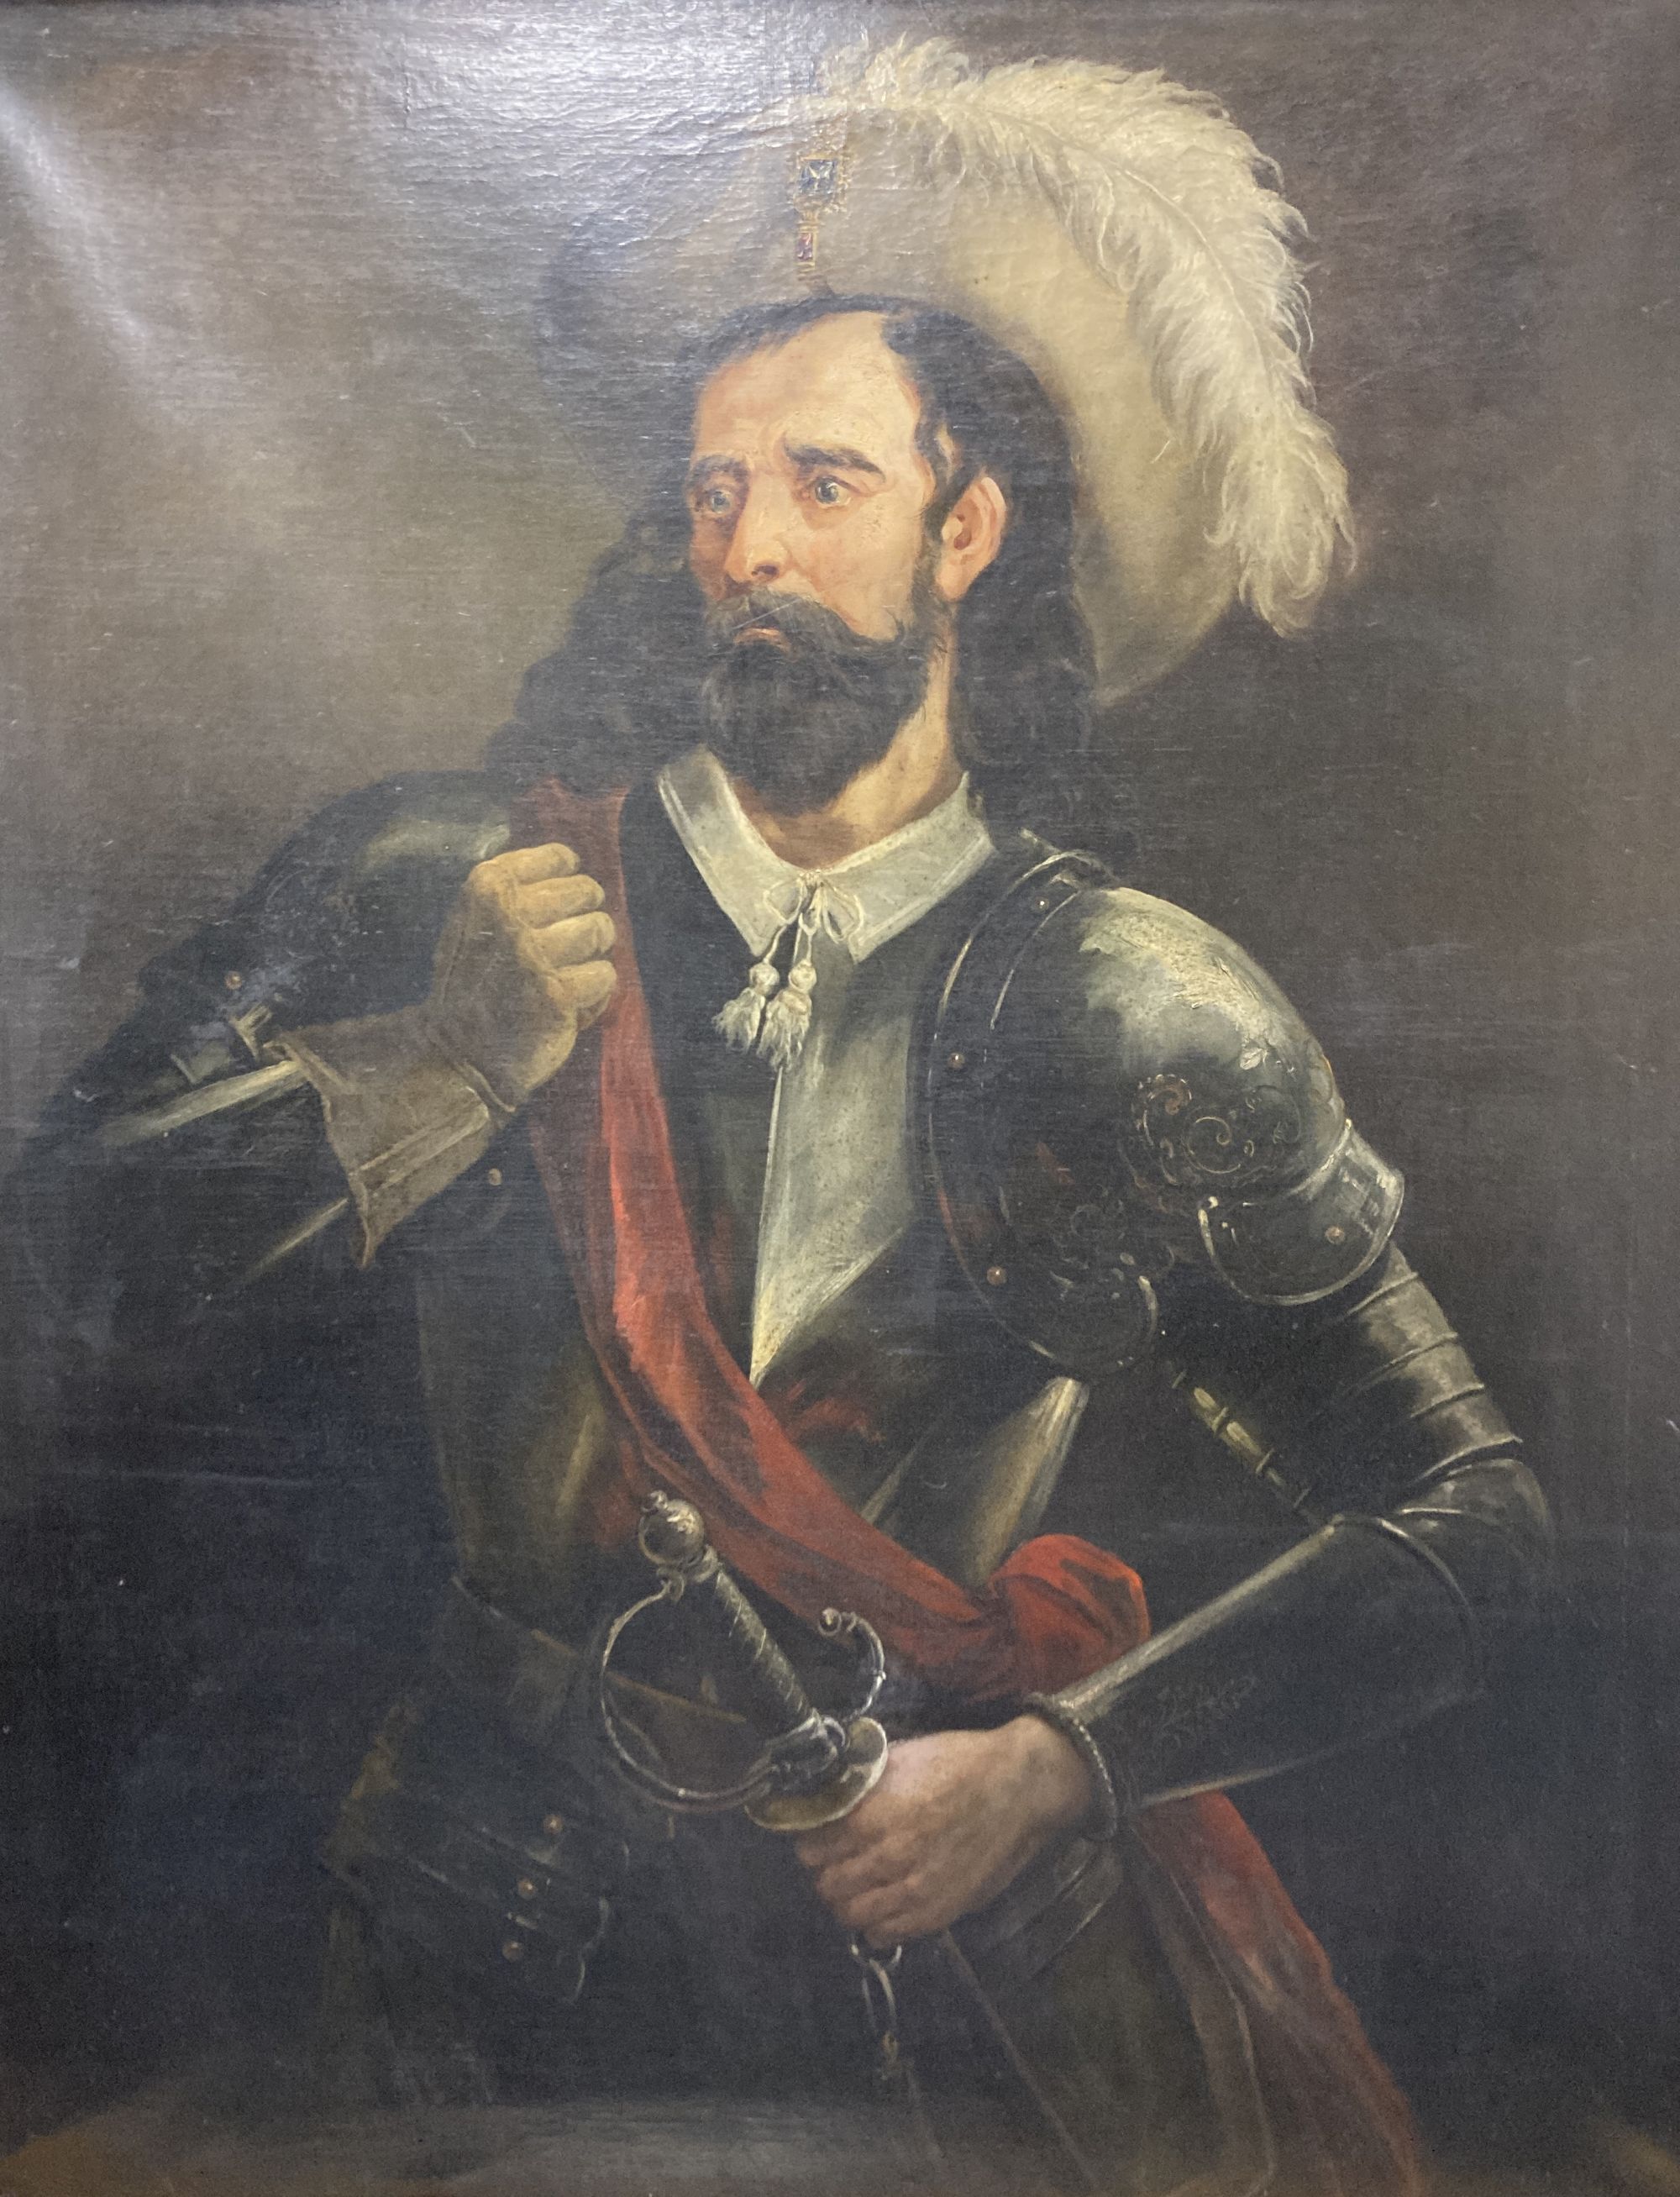 Late 19th century English School, oil on canvas, Portrait of a 17th century gentleman wearing armour, 123 x 99cm